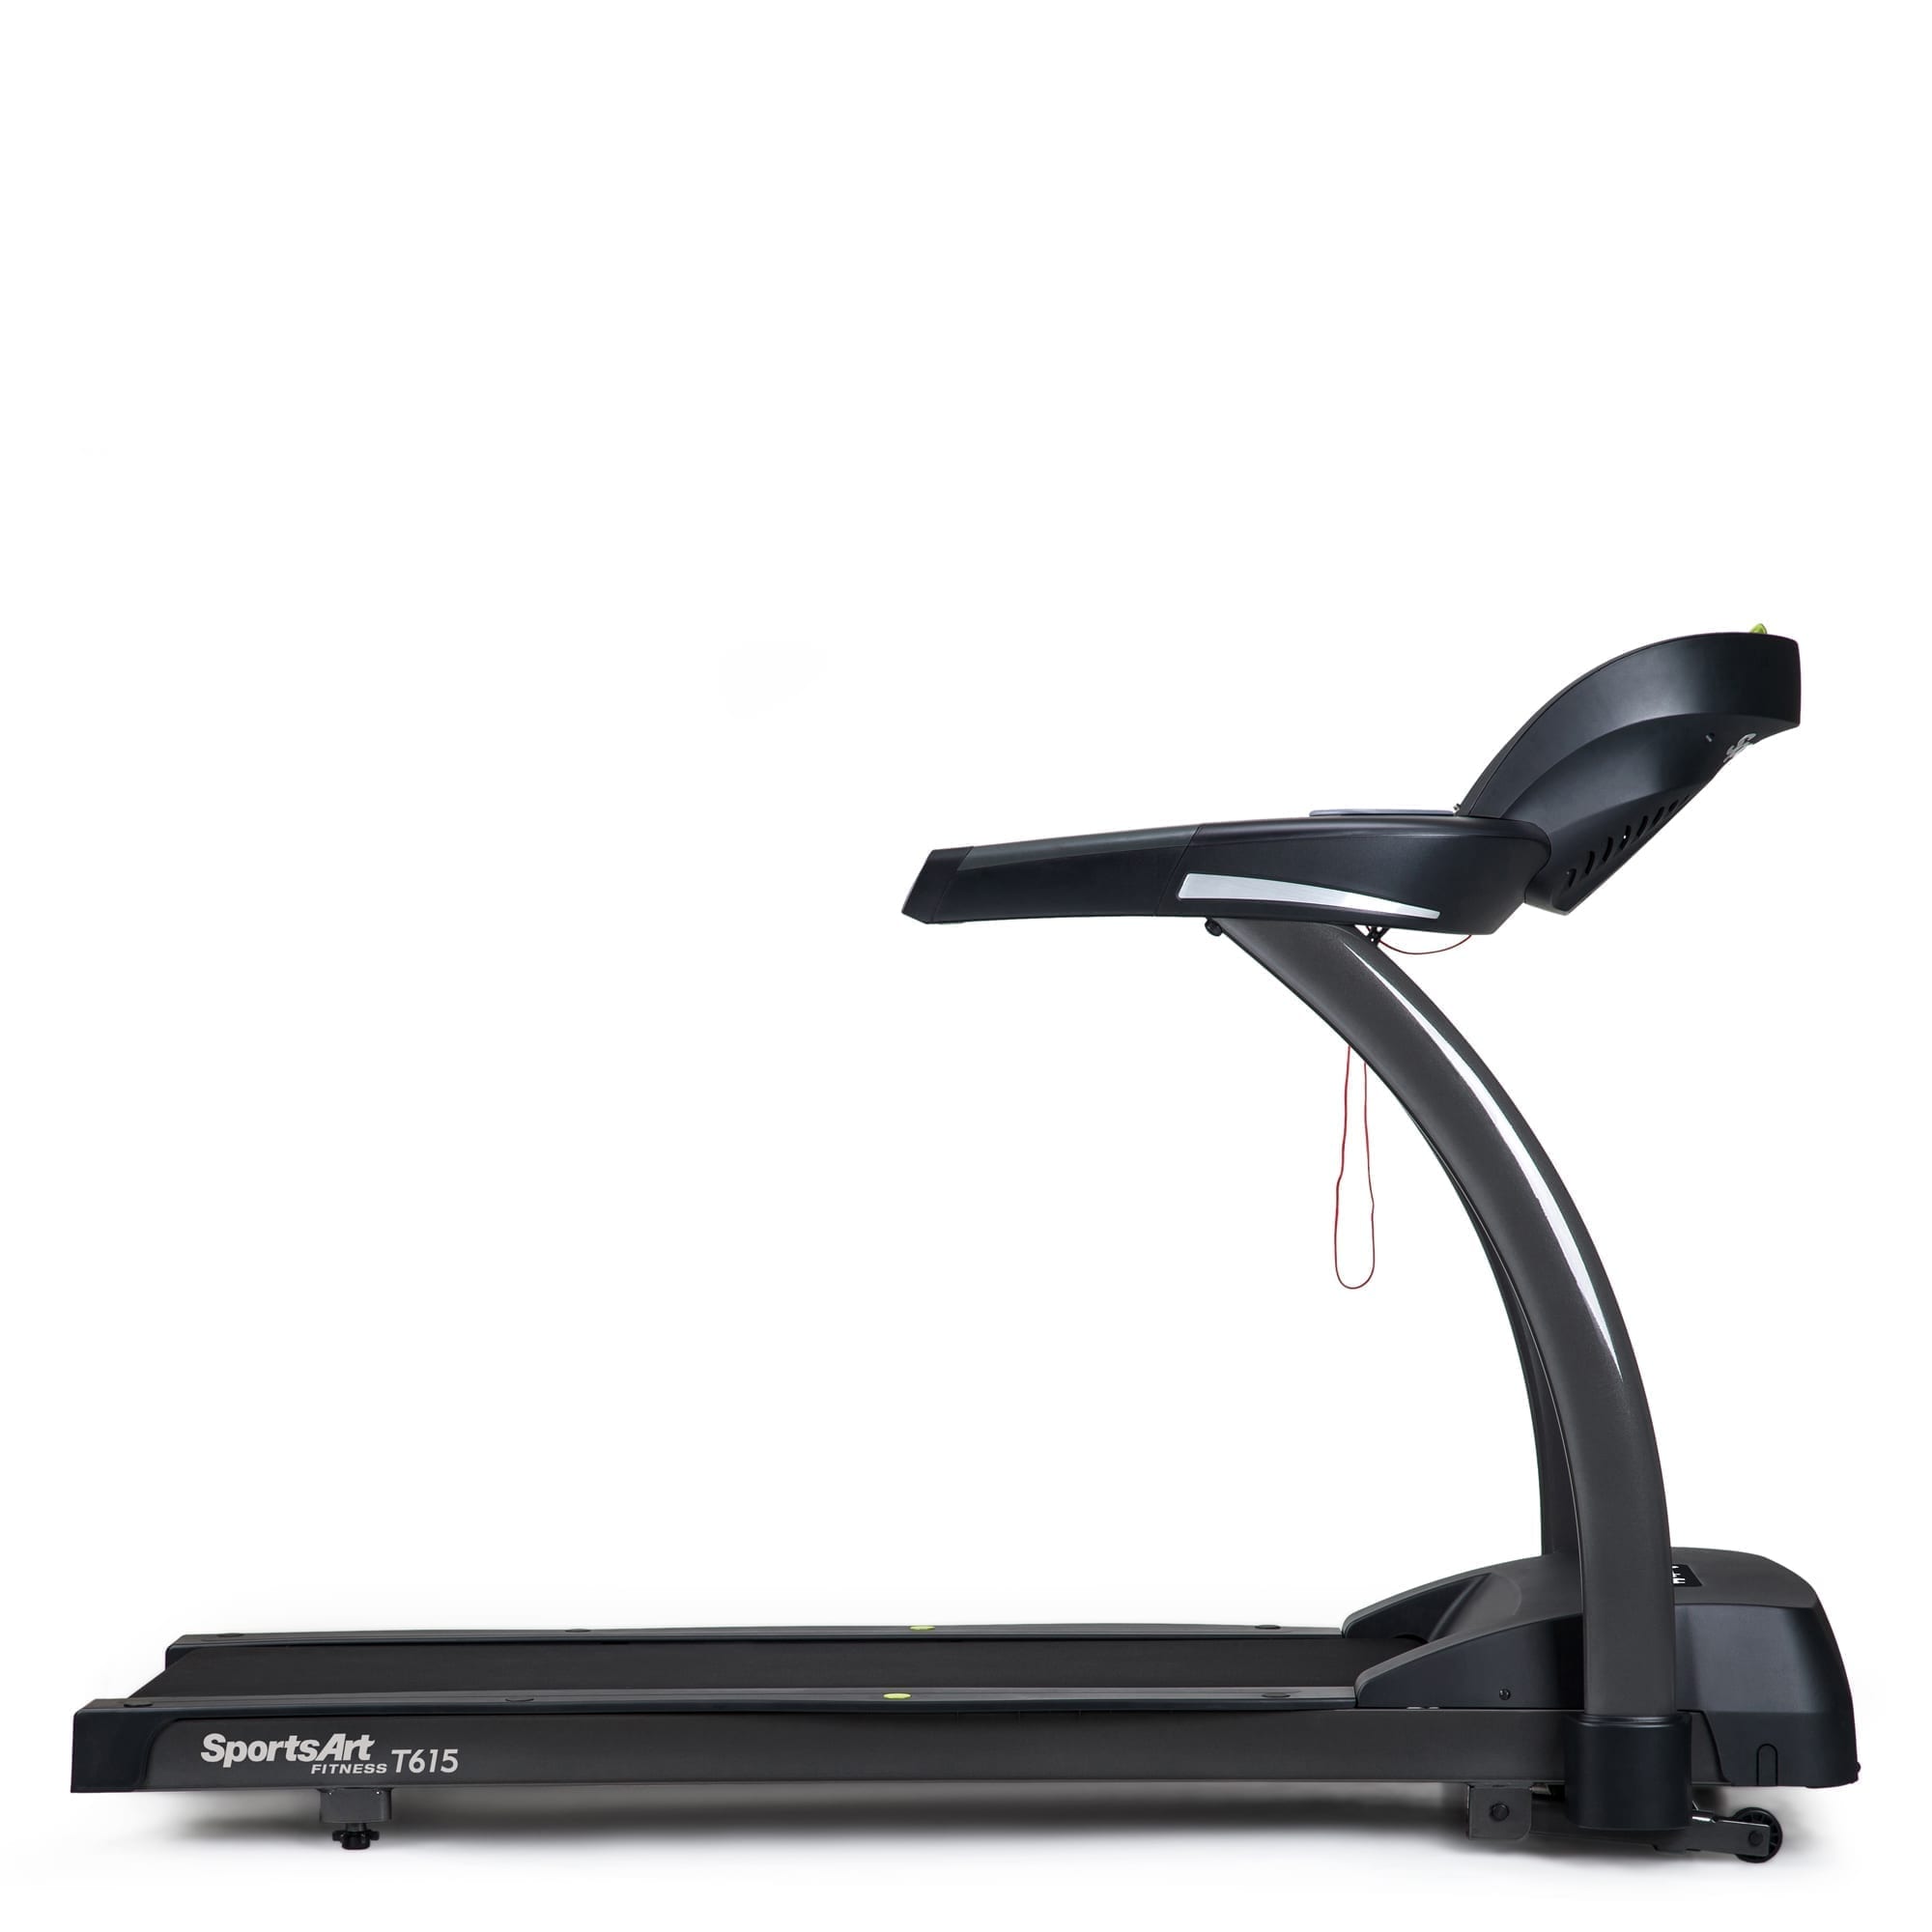 SportsArt Foundation Treadmill With Chr and Eco-Glide, T615-CHR side view with console toward the right side